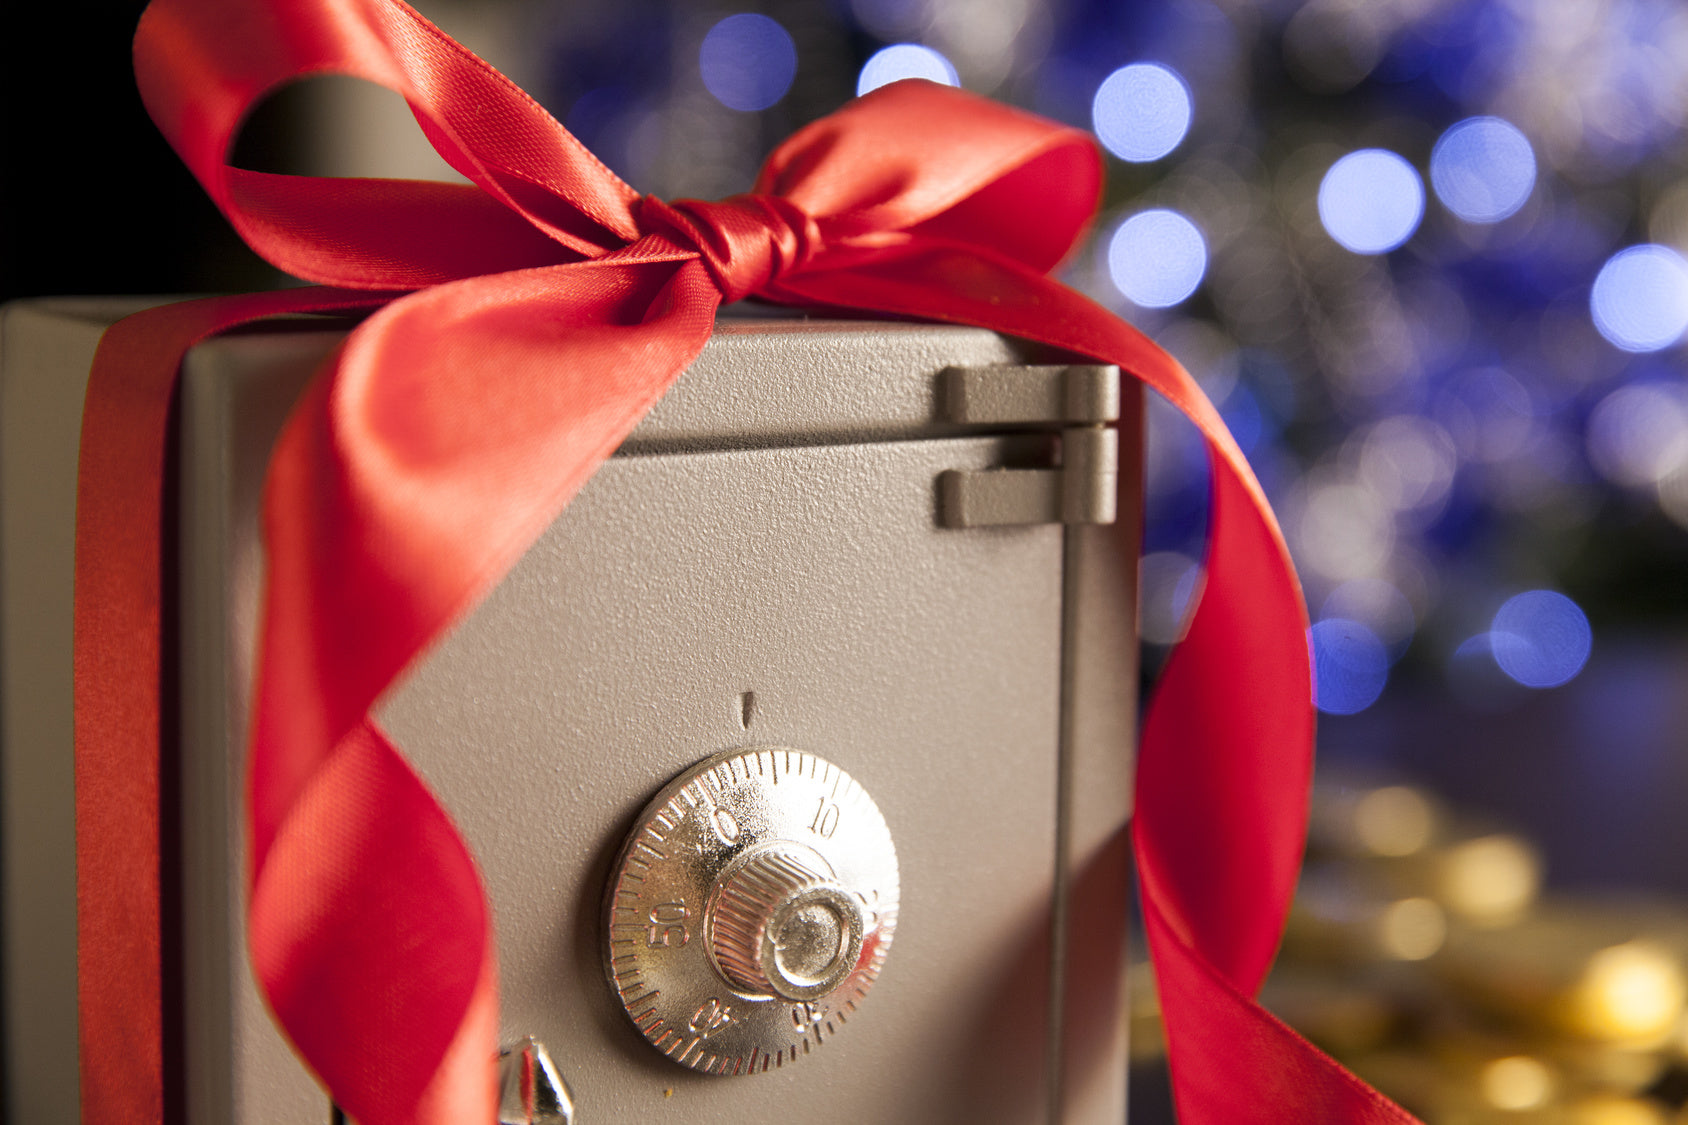 The perfect gift for your family this Christmas is a Gun Safe